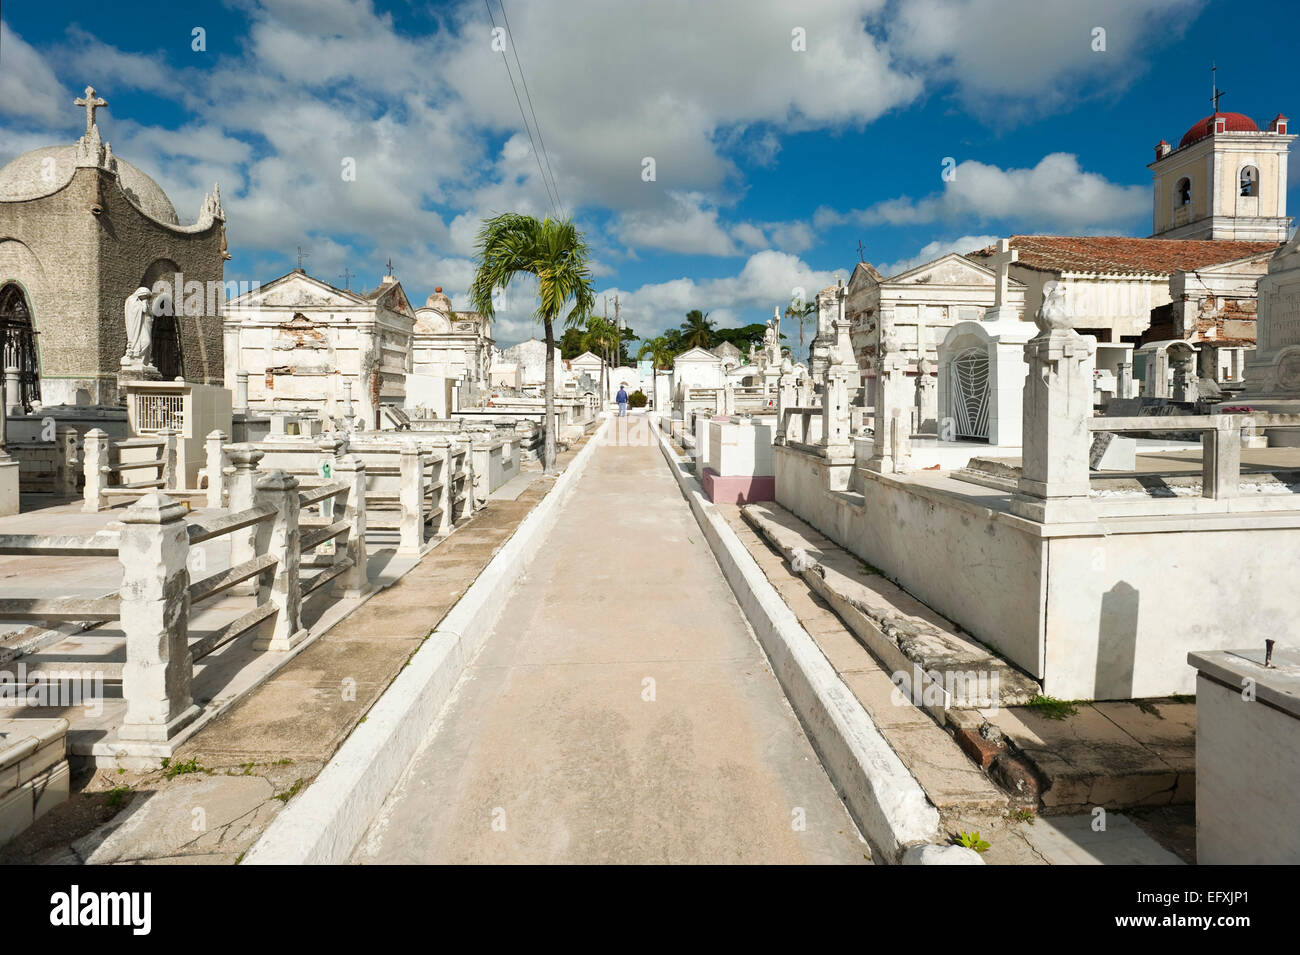 Horizontal view of the General cemetry in Camaguey, Cuba. Stock Photo